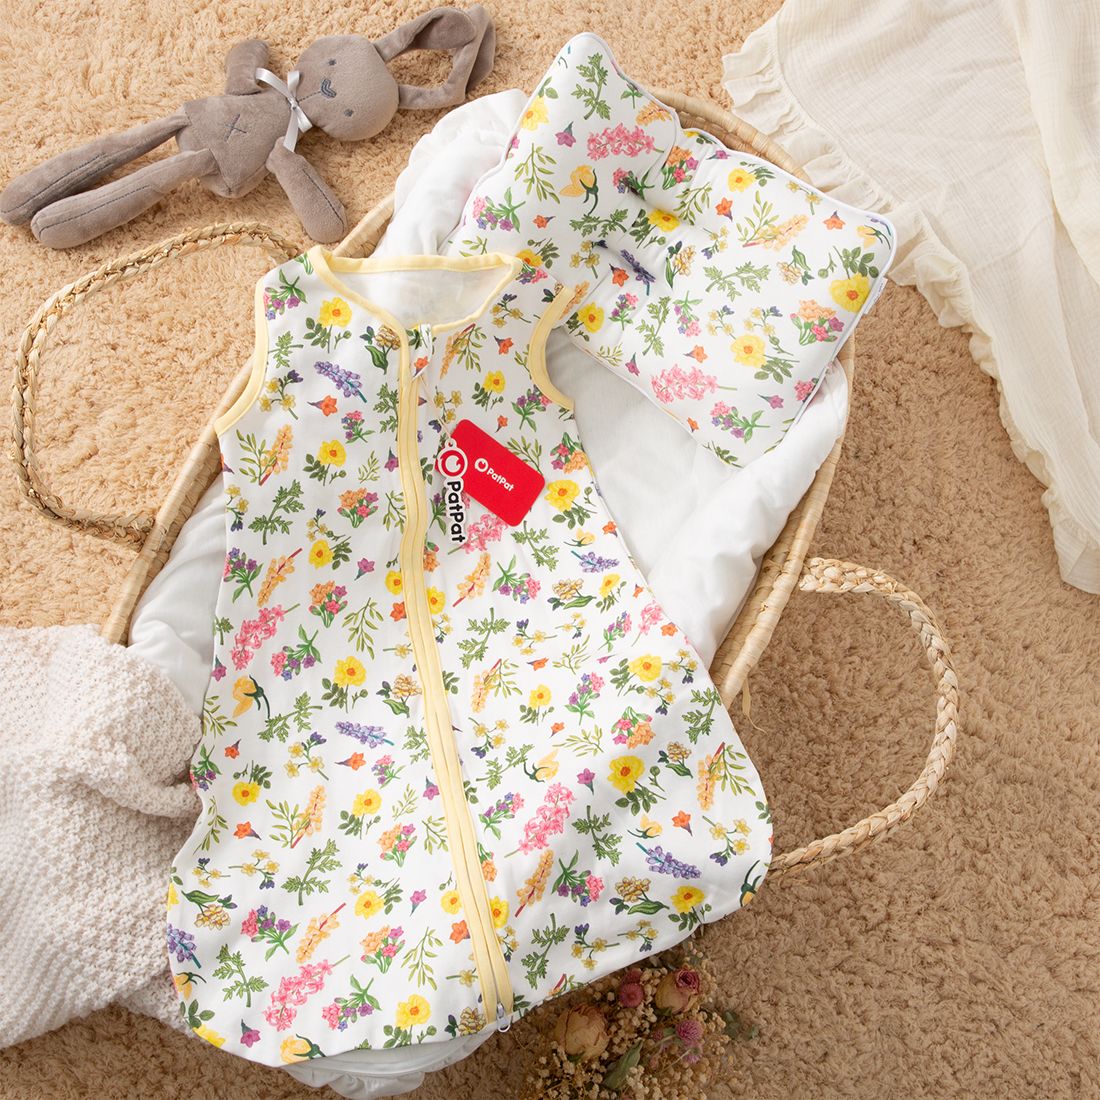 100% Cotton Floral Print Zip Up Sleeveless Baby Sleeping Bags / Pillow / Swaddling Blanket